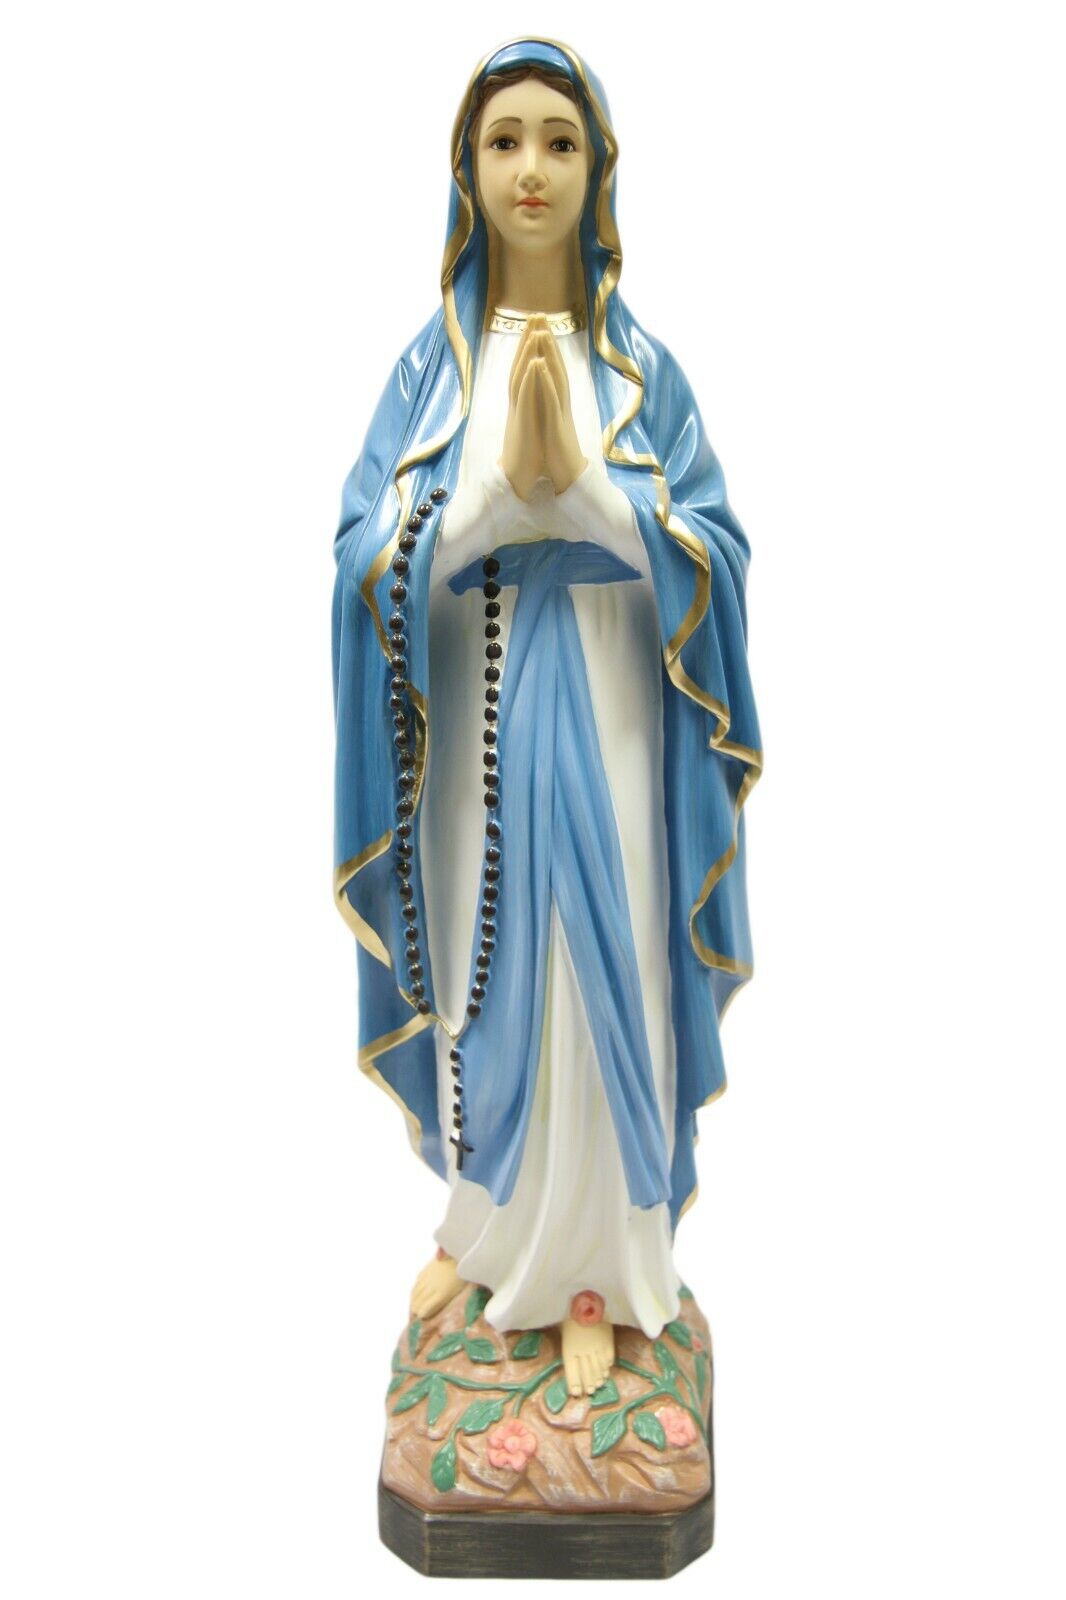 25 Inches Our Lady of Lourdes Virgin Mary Mother Catholic Statue Figurine 